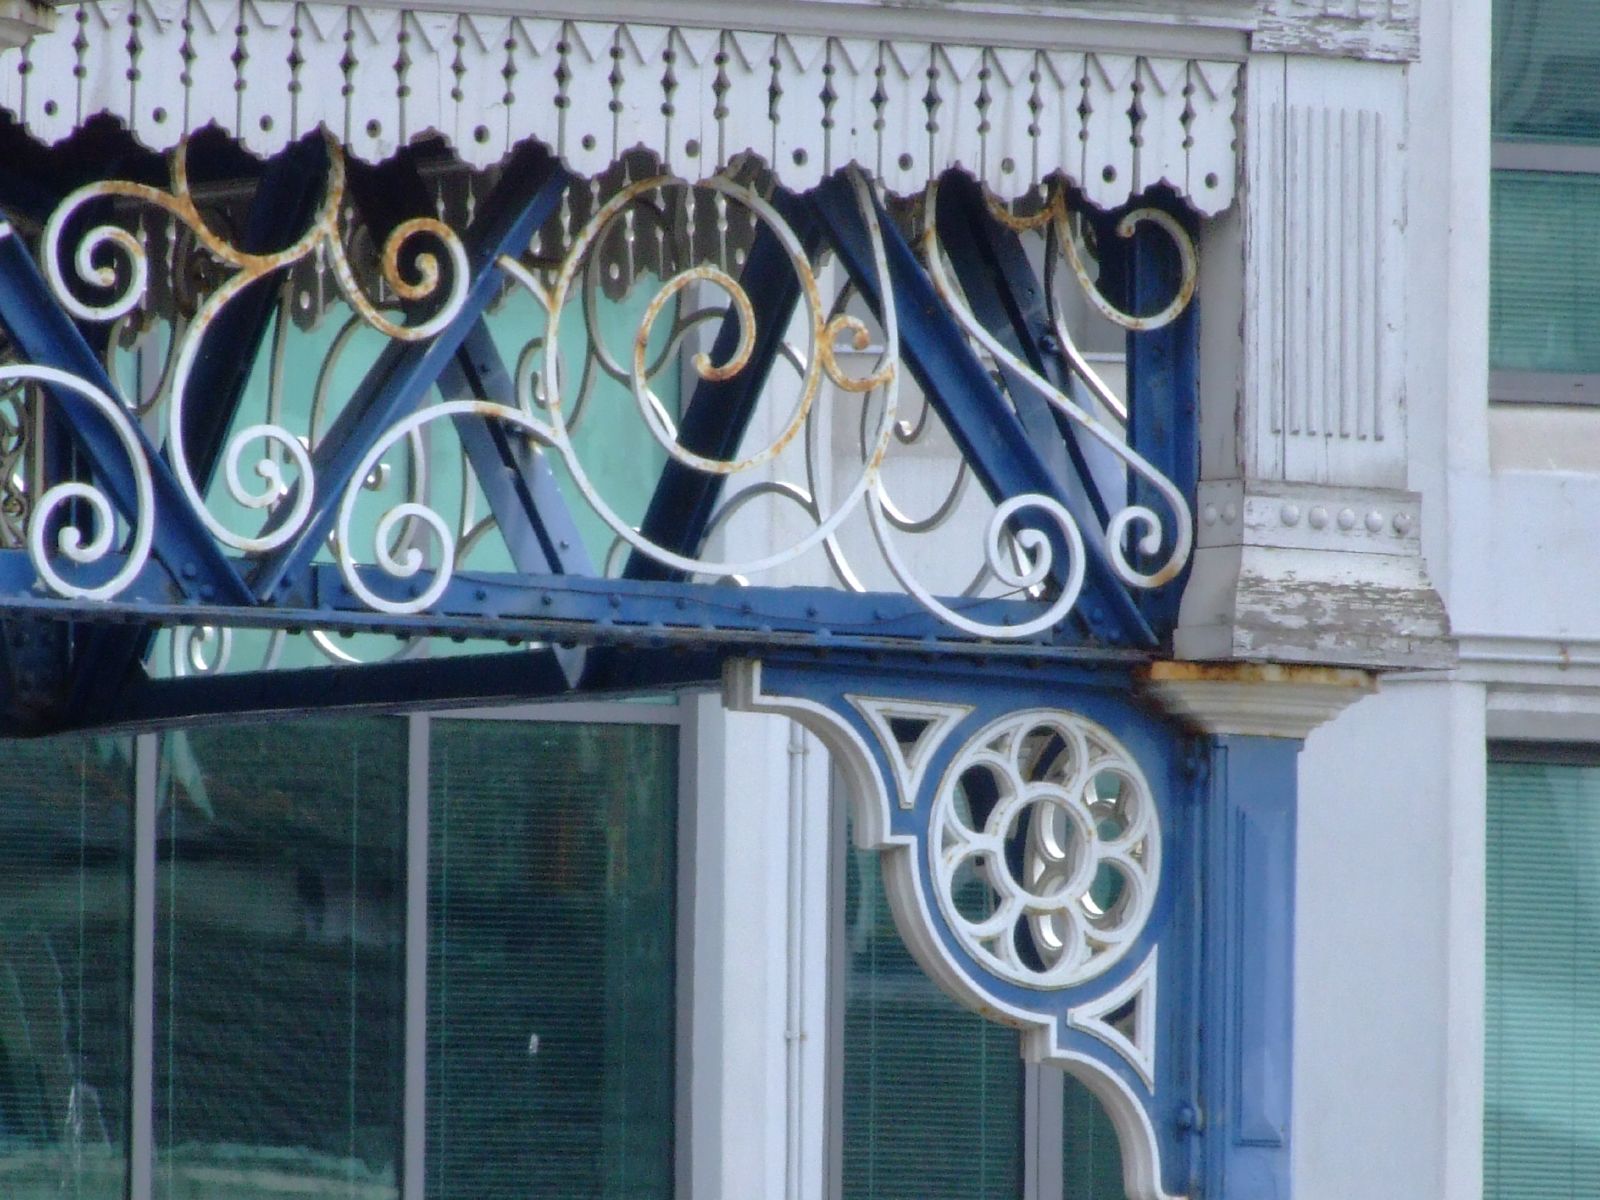 the iron and glass details are in an architectural style